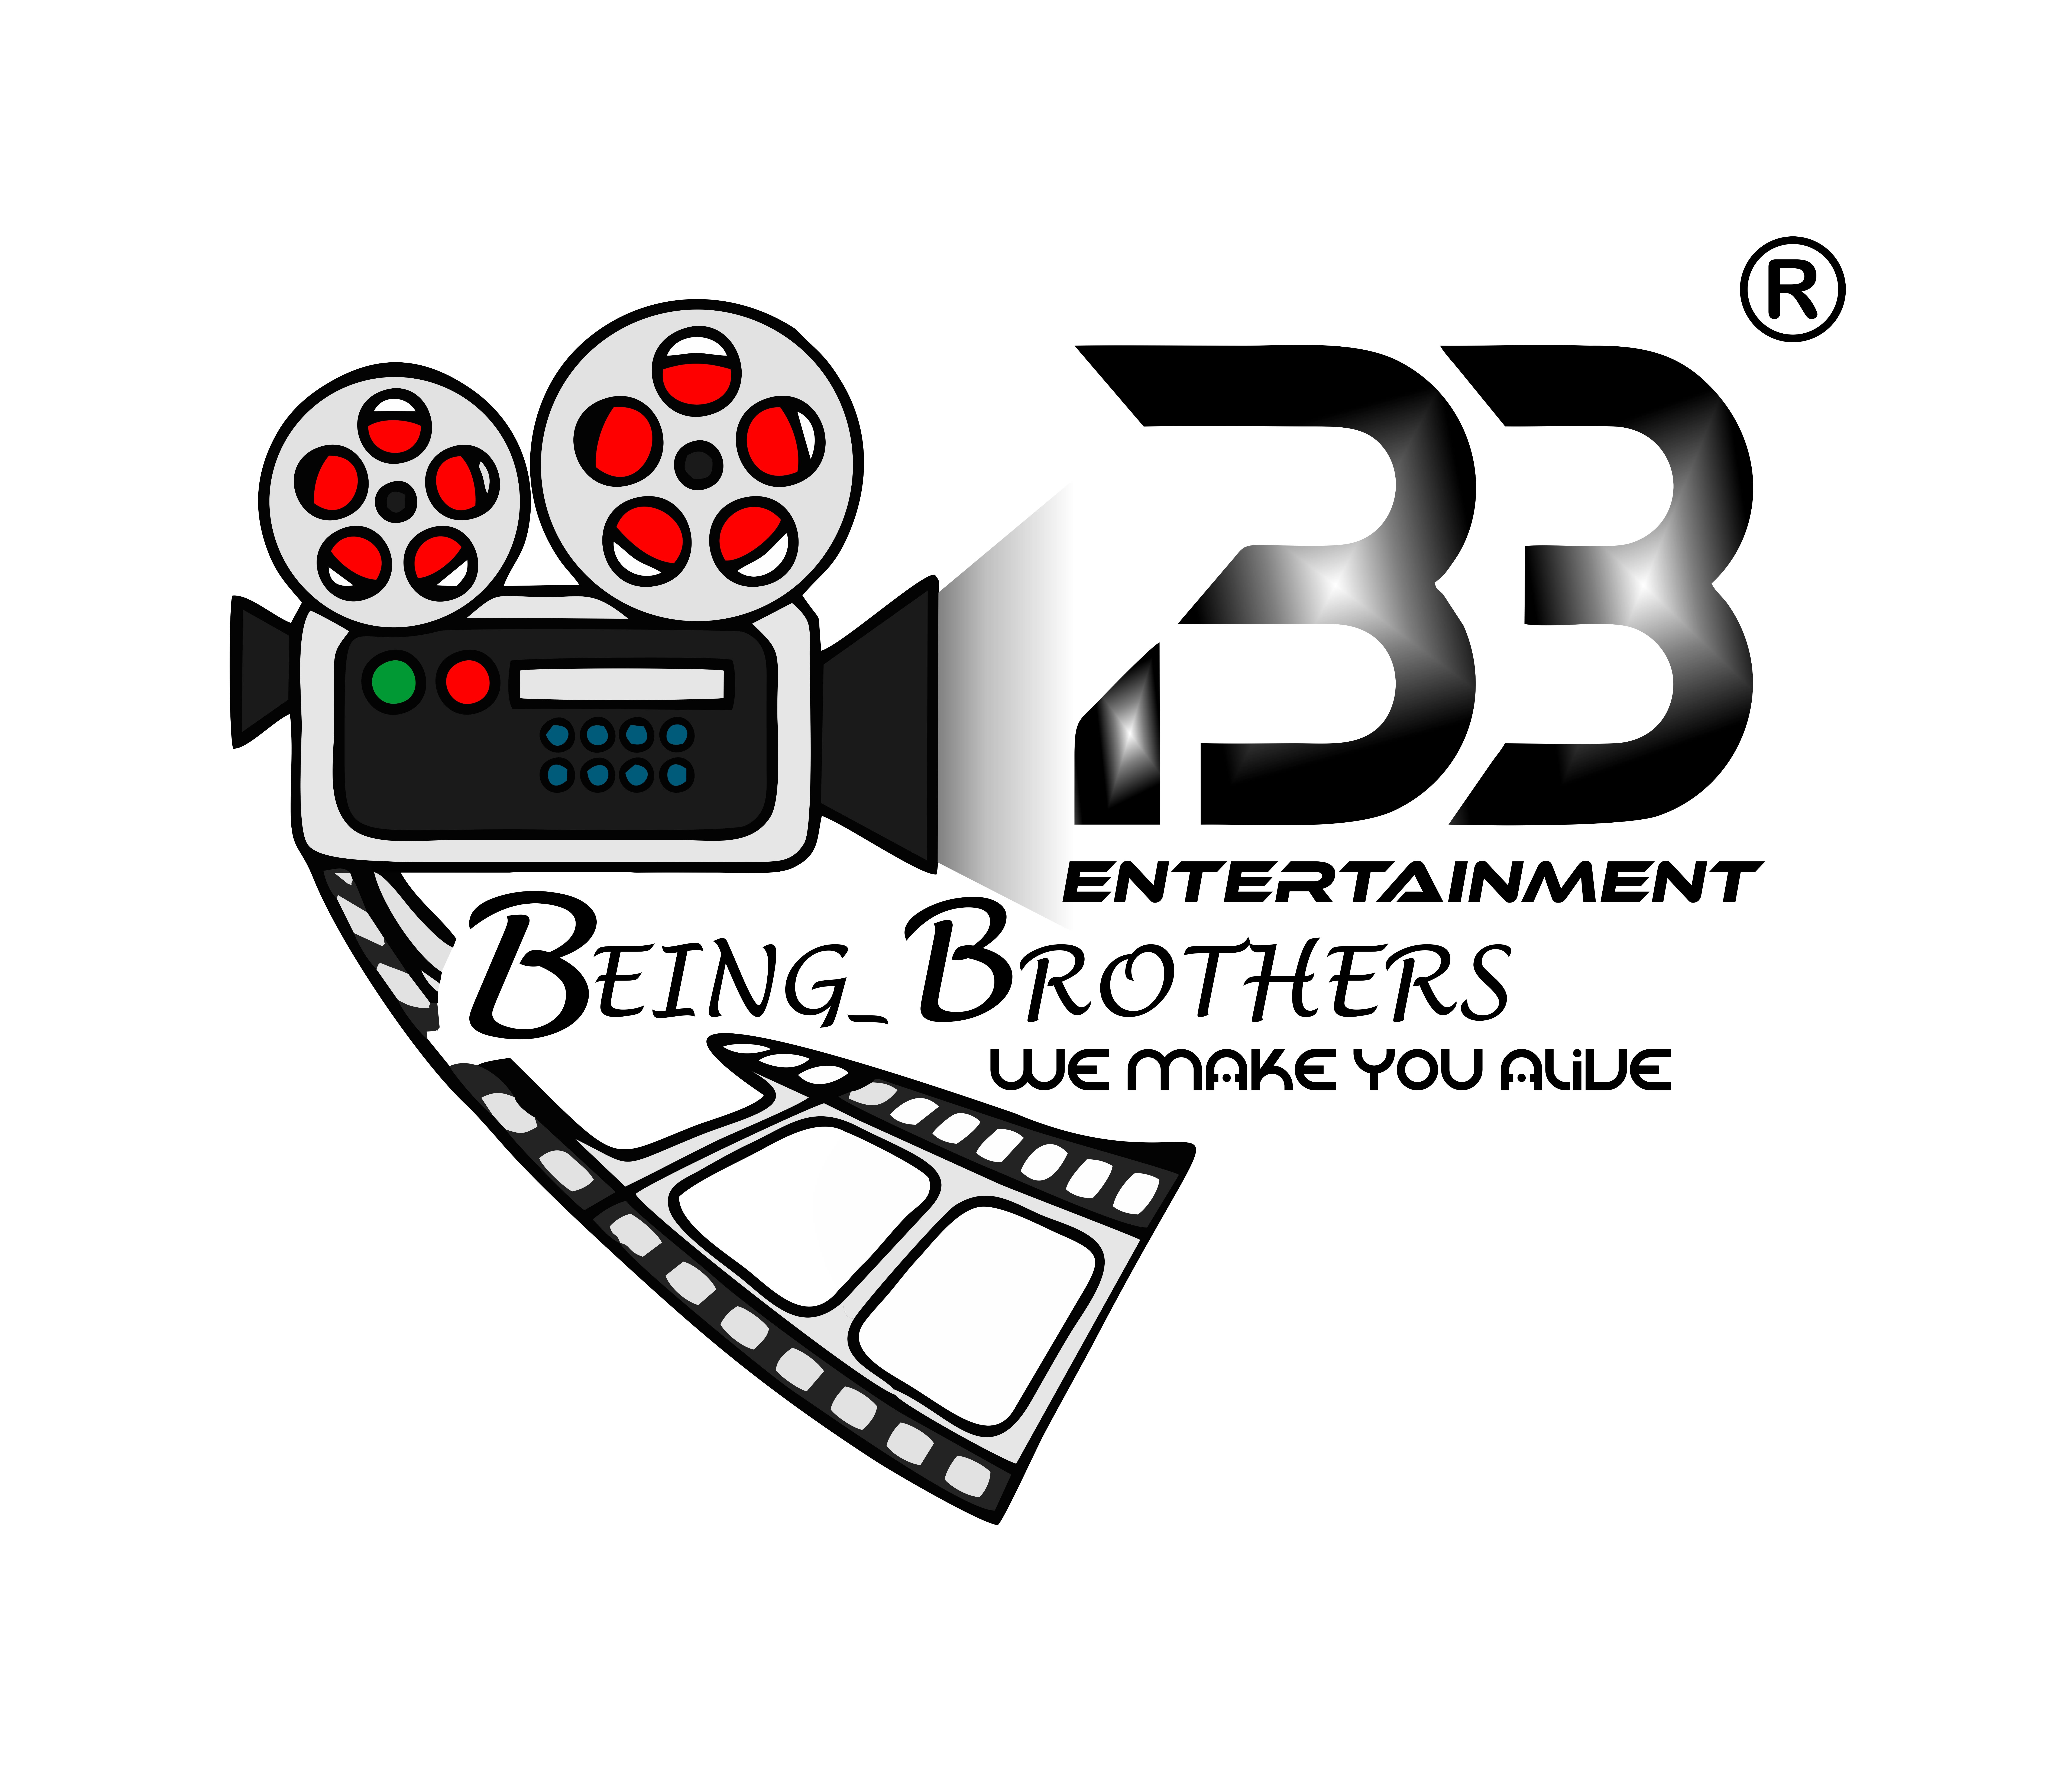 BEING_BROTHERS ENTERTAINMENT